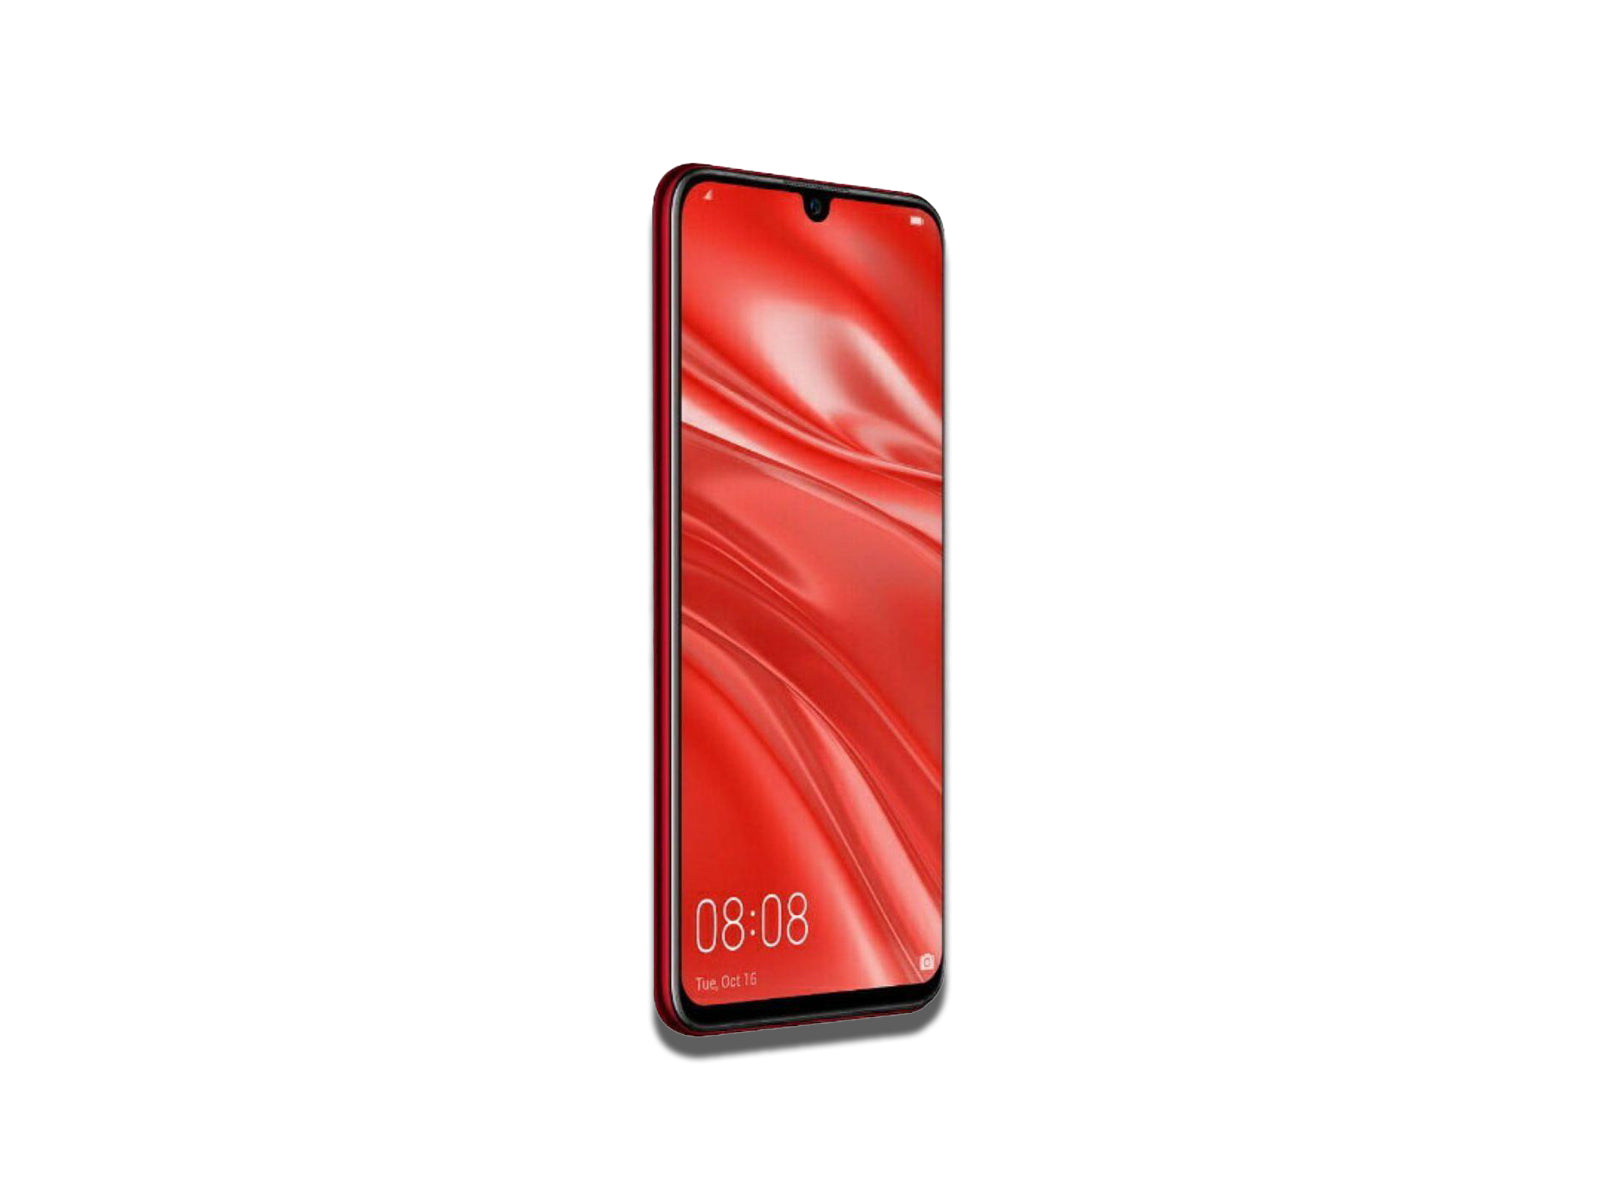 Front View of The Red Huawei Phone on The White Background